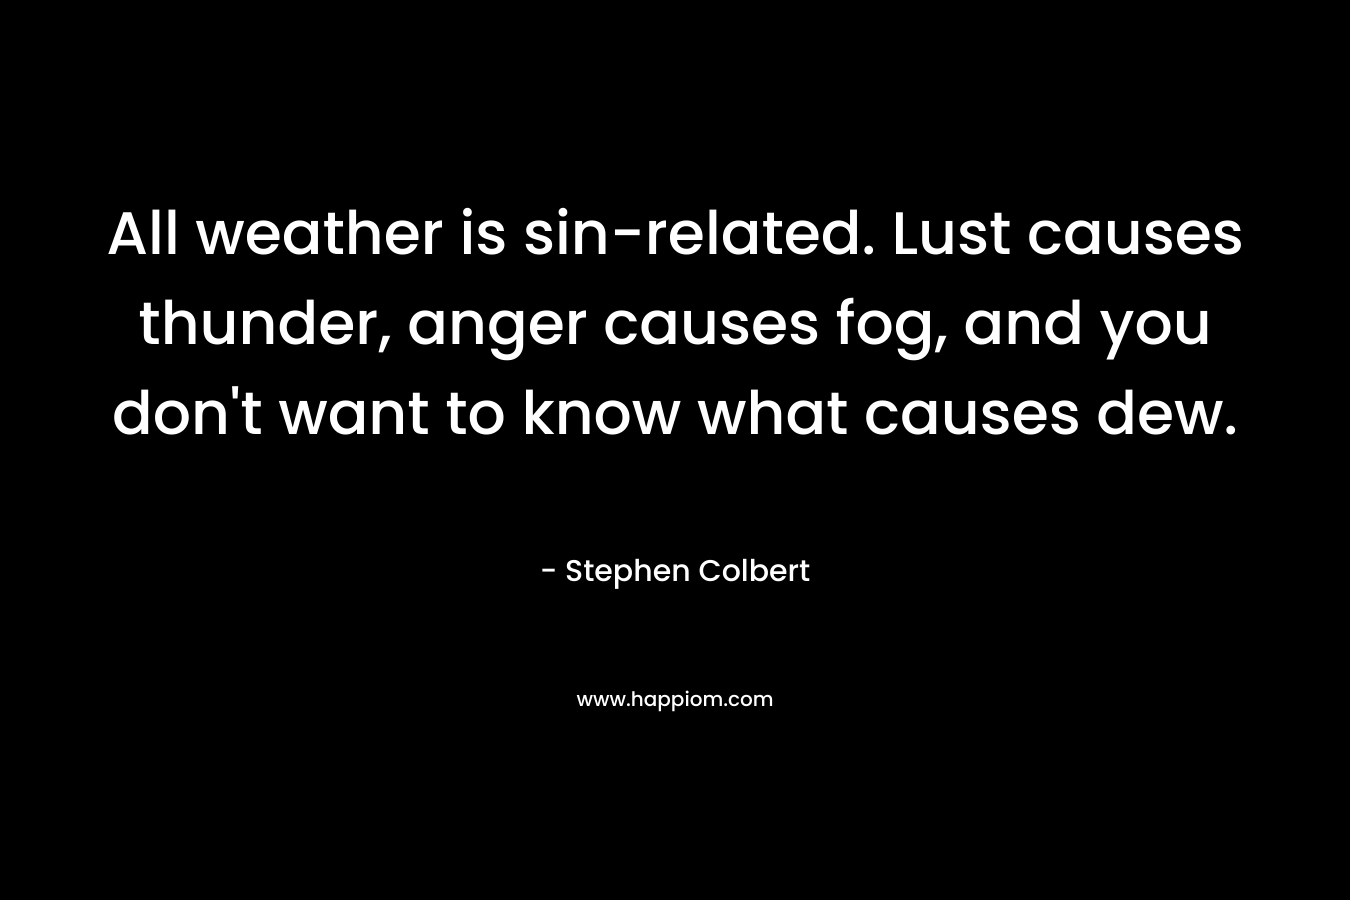 All weather is sin-related. Lust causes thunder, anger causes fog, and you don’t want to know what causes dew. – Stephen Colbert